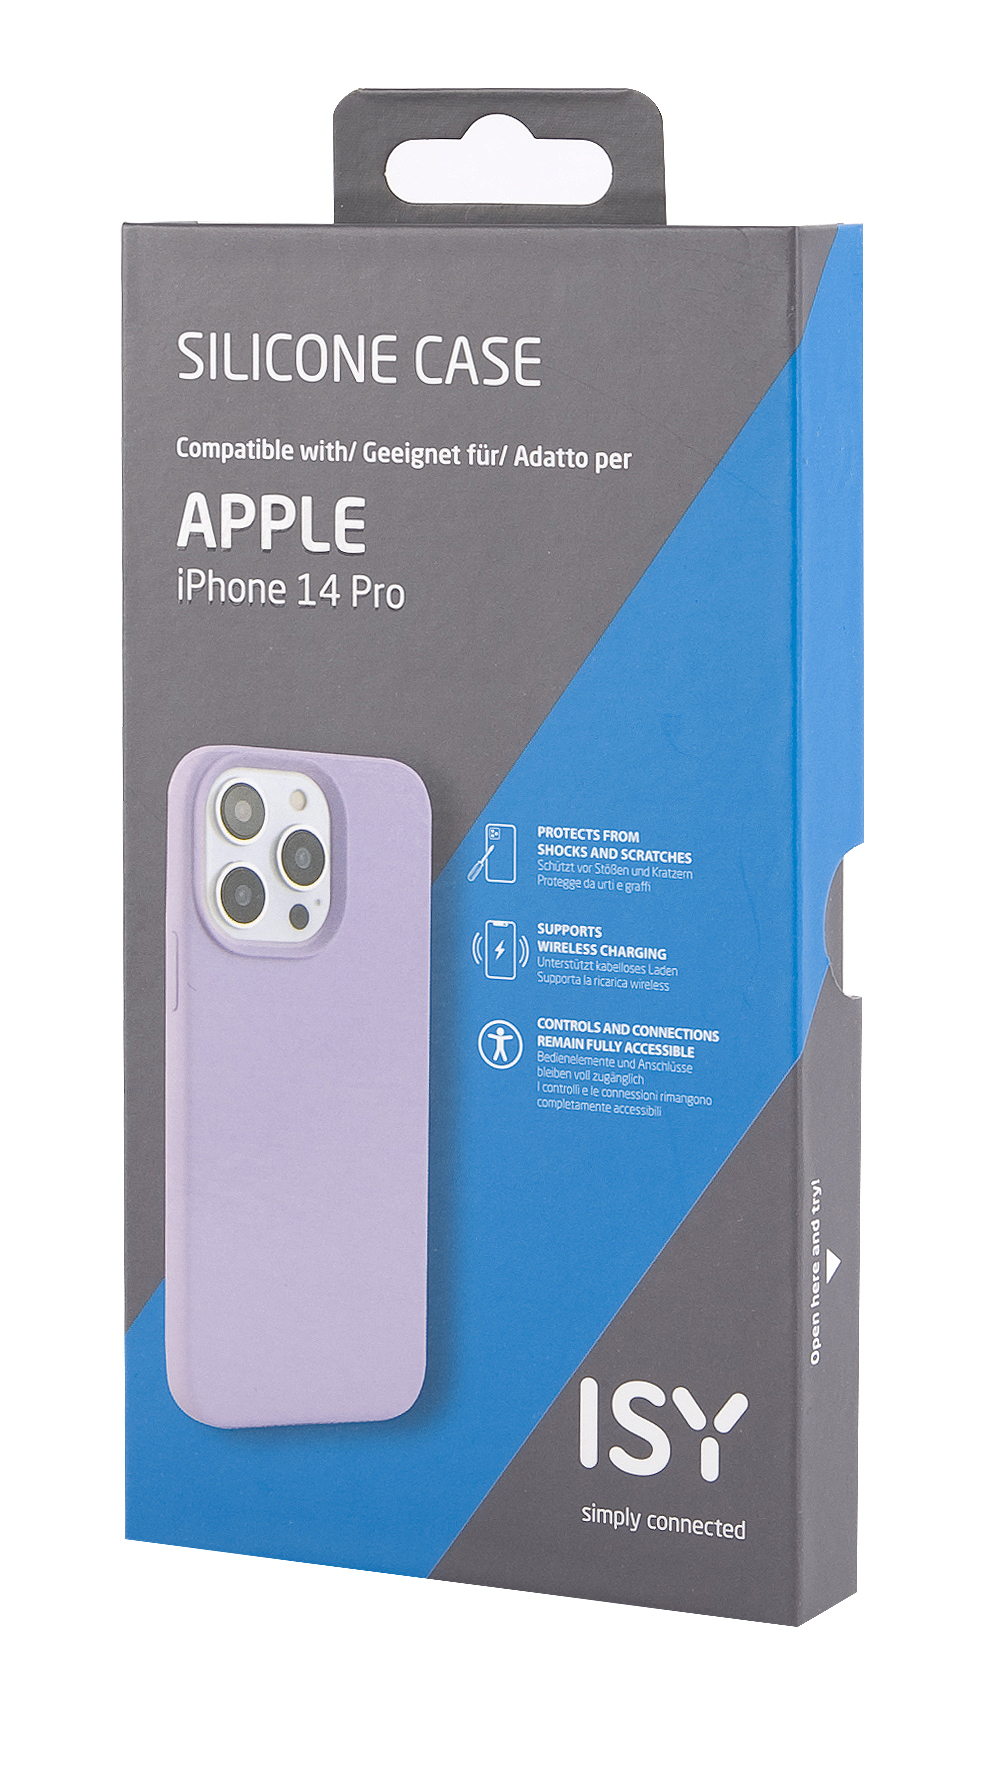 Violett ISC-2321, 14 Pro, ISY Apple, Backcover, iPhone